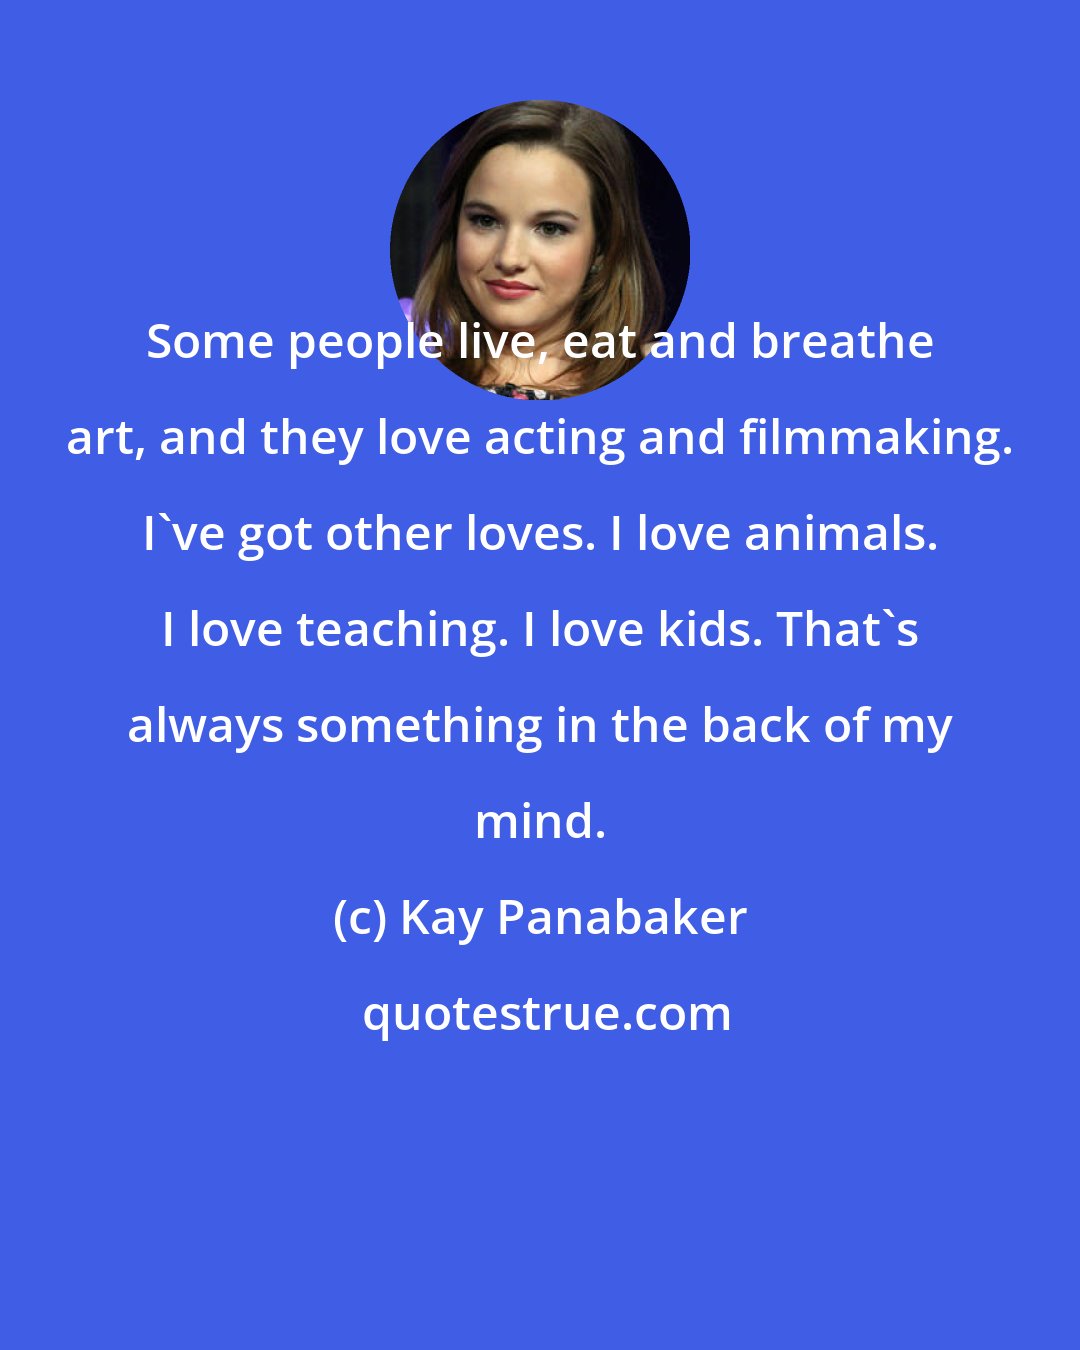 Kay Panabaker: Some people live, eat and breathe art, and they love acting and filmmaking. I've got other loves. I love animals. I love teaching. I love kids. That's always something in the back of my mind.